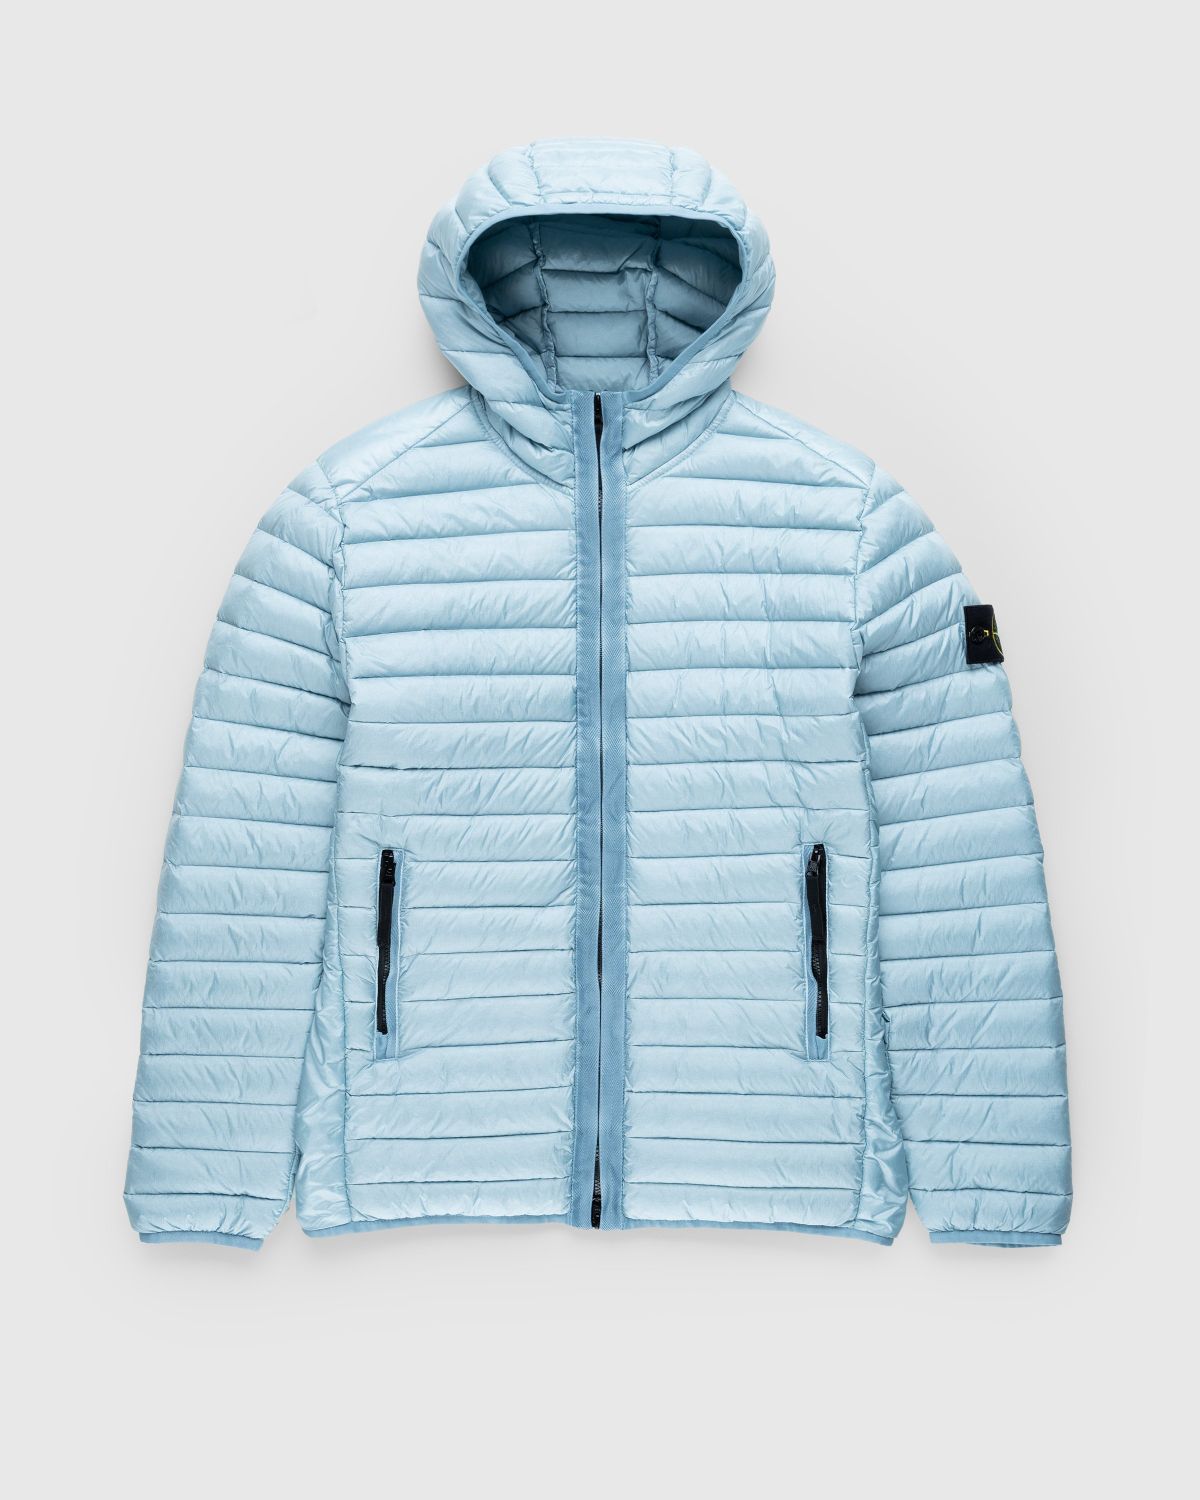 Stone Island – Packable Recycled Nylon Down Jacket Sky Blue - Outerwear - Blue - Image 1